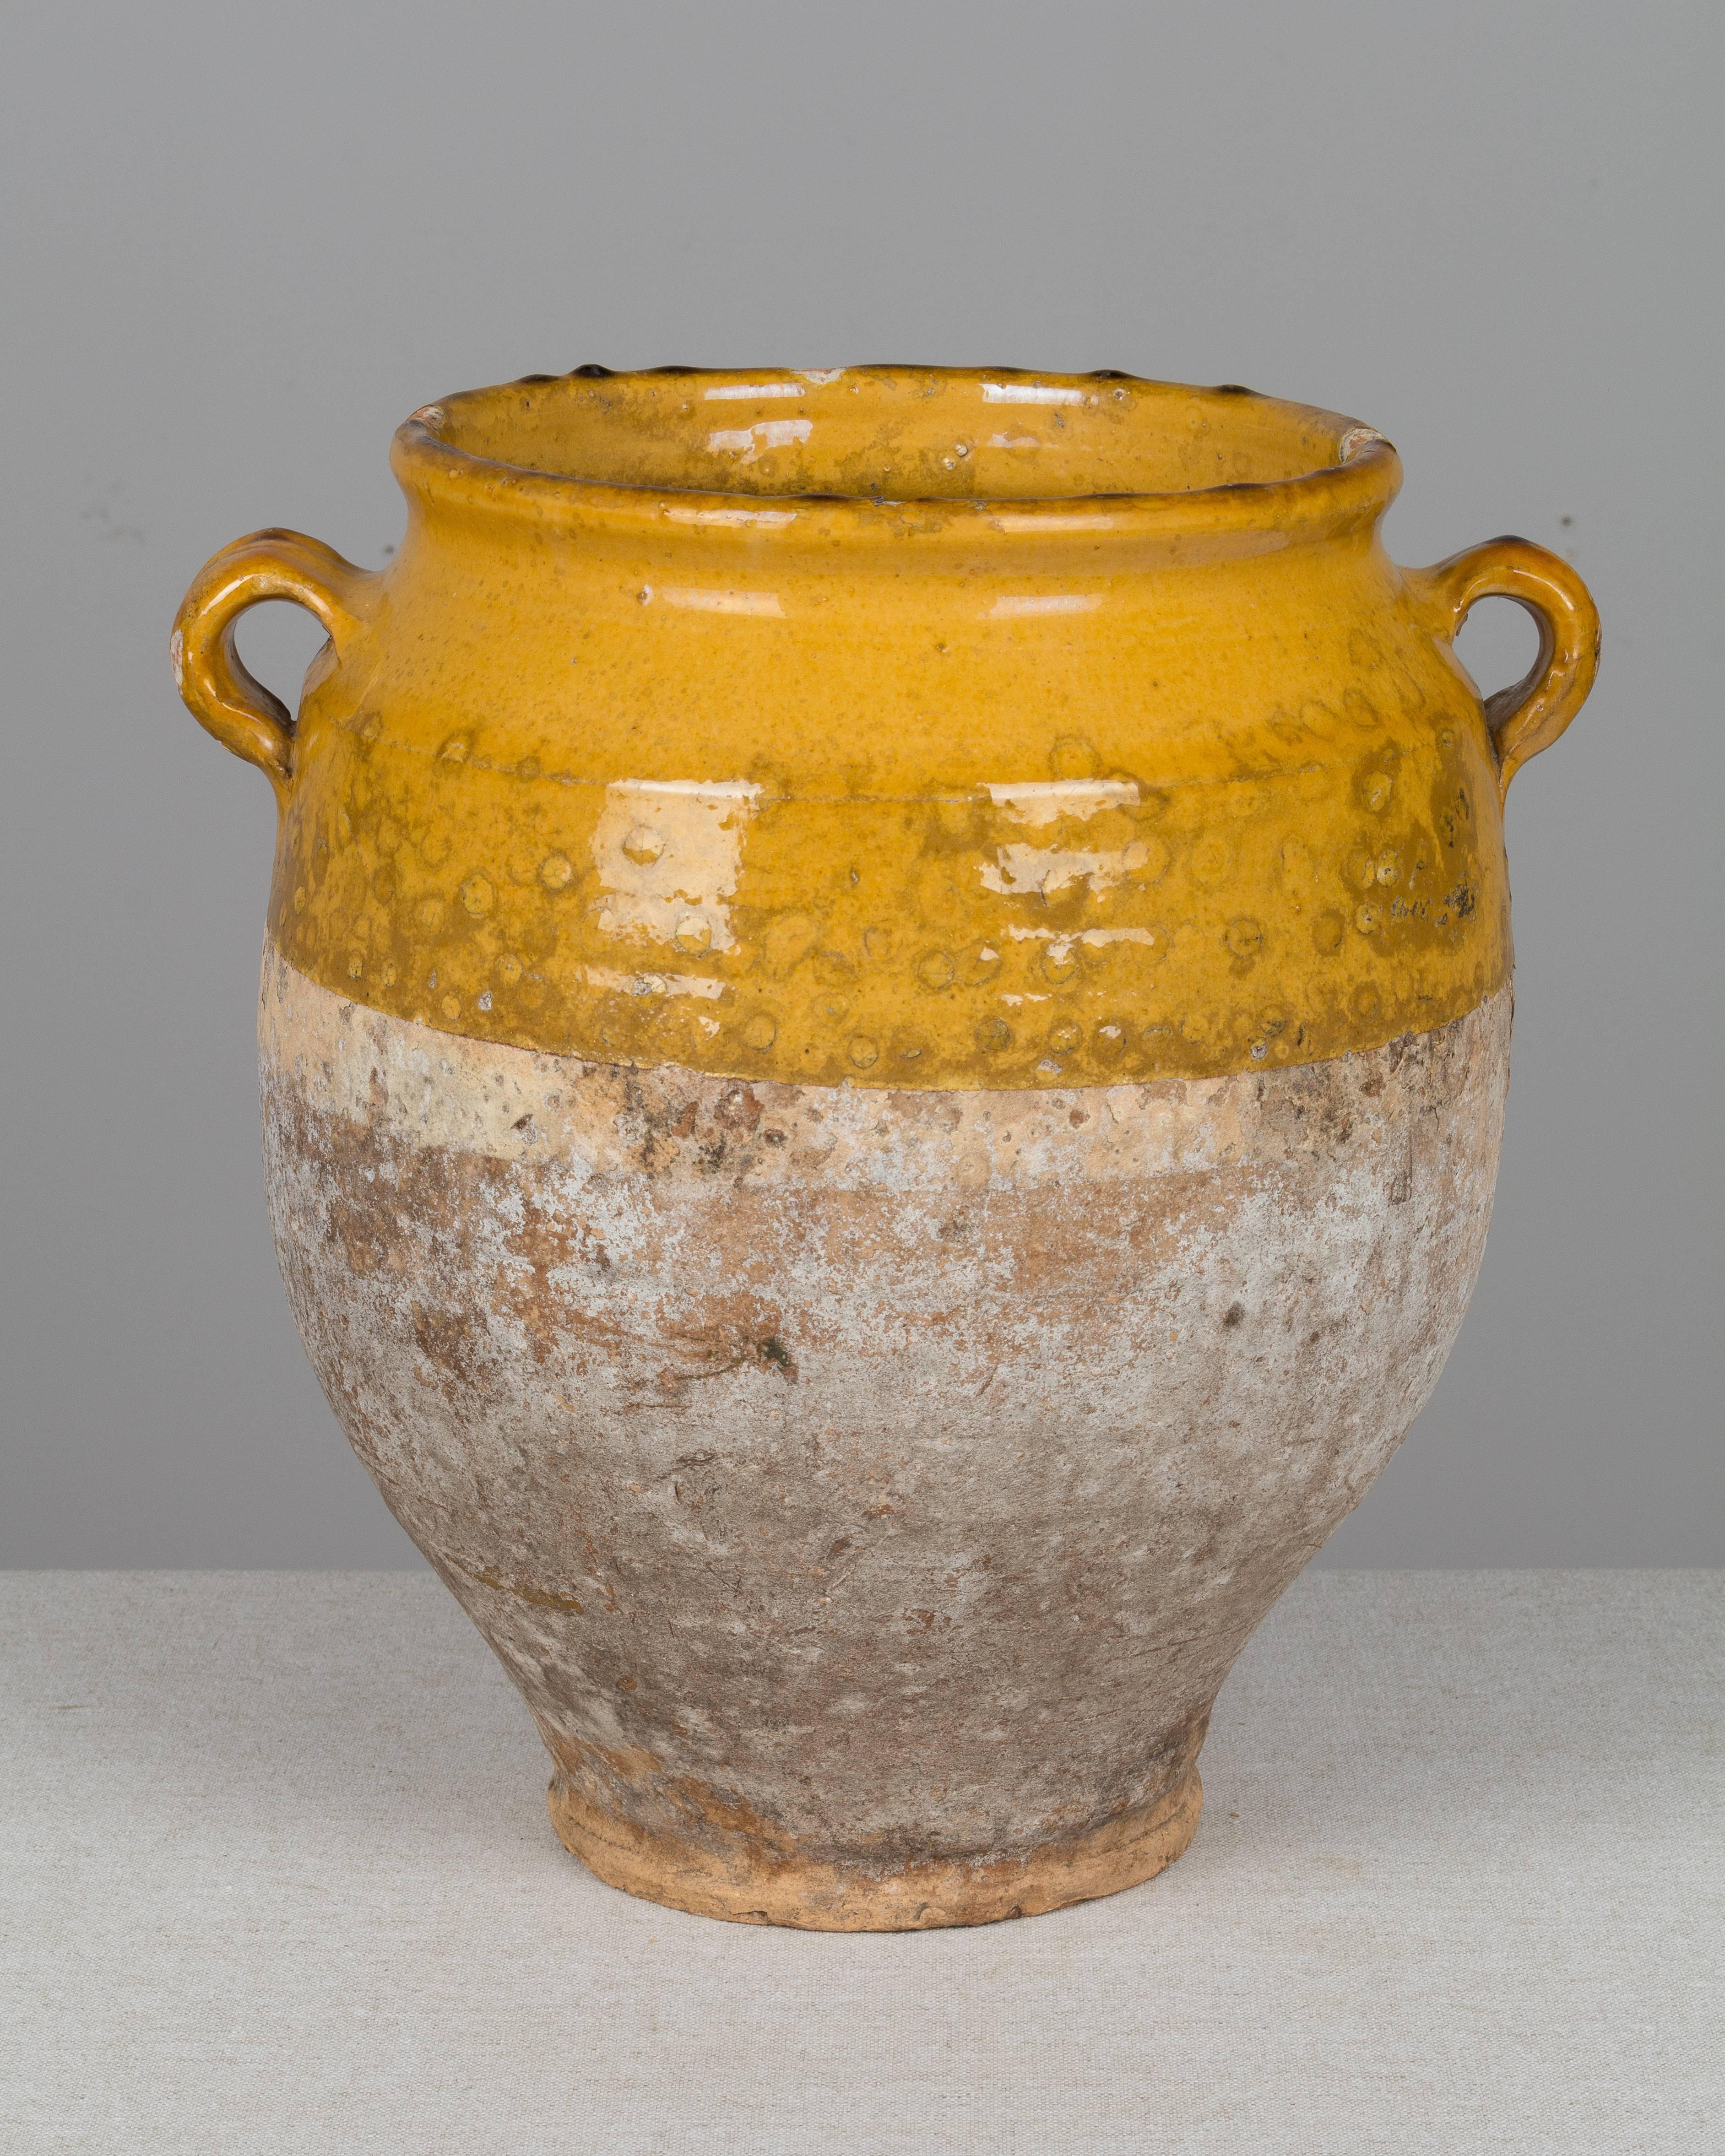 An earthenware confit pot from the Southwest of France with traditional ochre yellow glaze. Beautiful patina. Minor losses. These ordinary earthenware vessels were once used daily in the French country home and have beautiful rustic glazes of green,